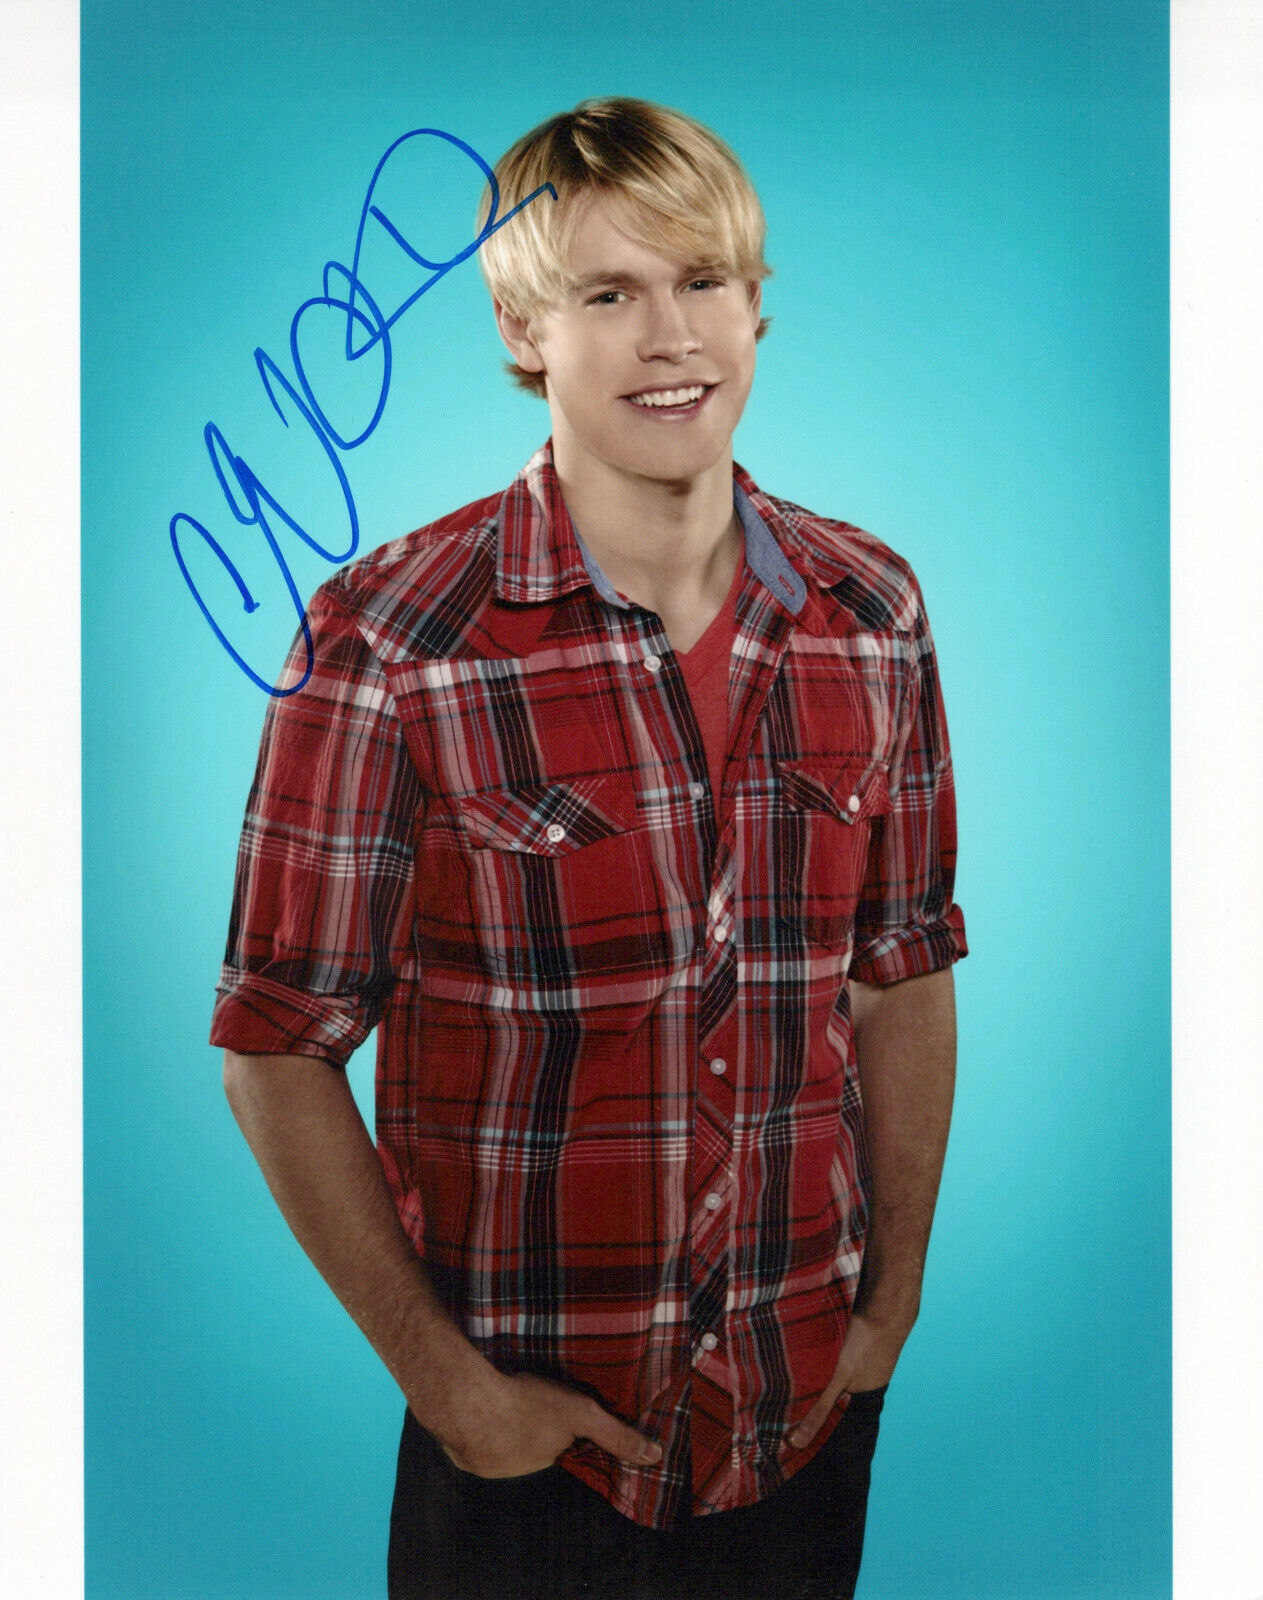 Chord Overstreet Glee autographed Photo Poster painting signed 8X10 #1 Sam Evans